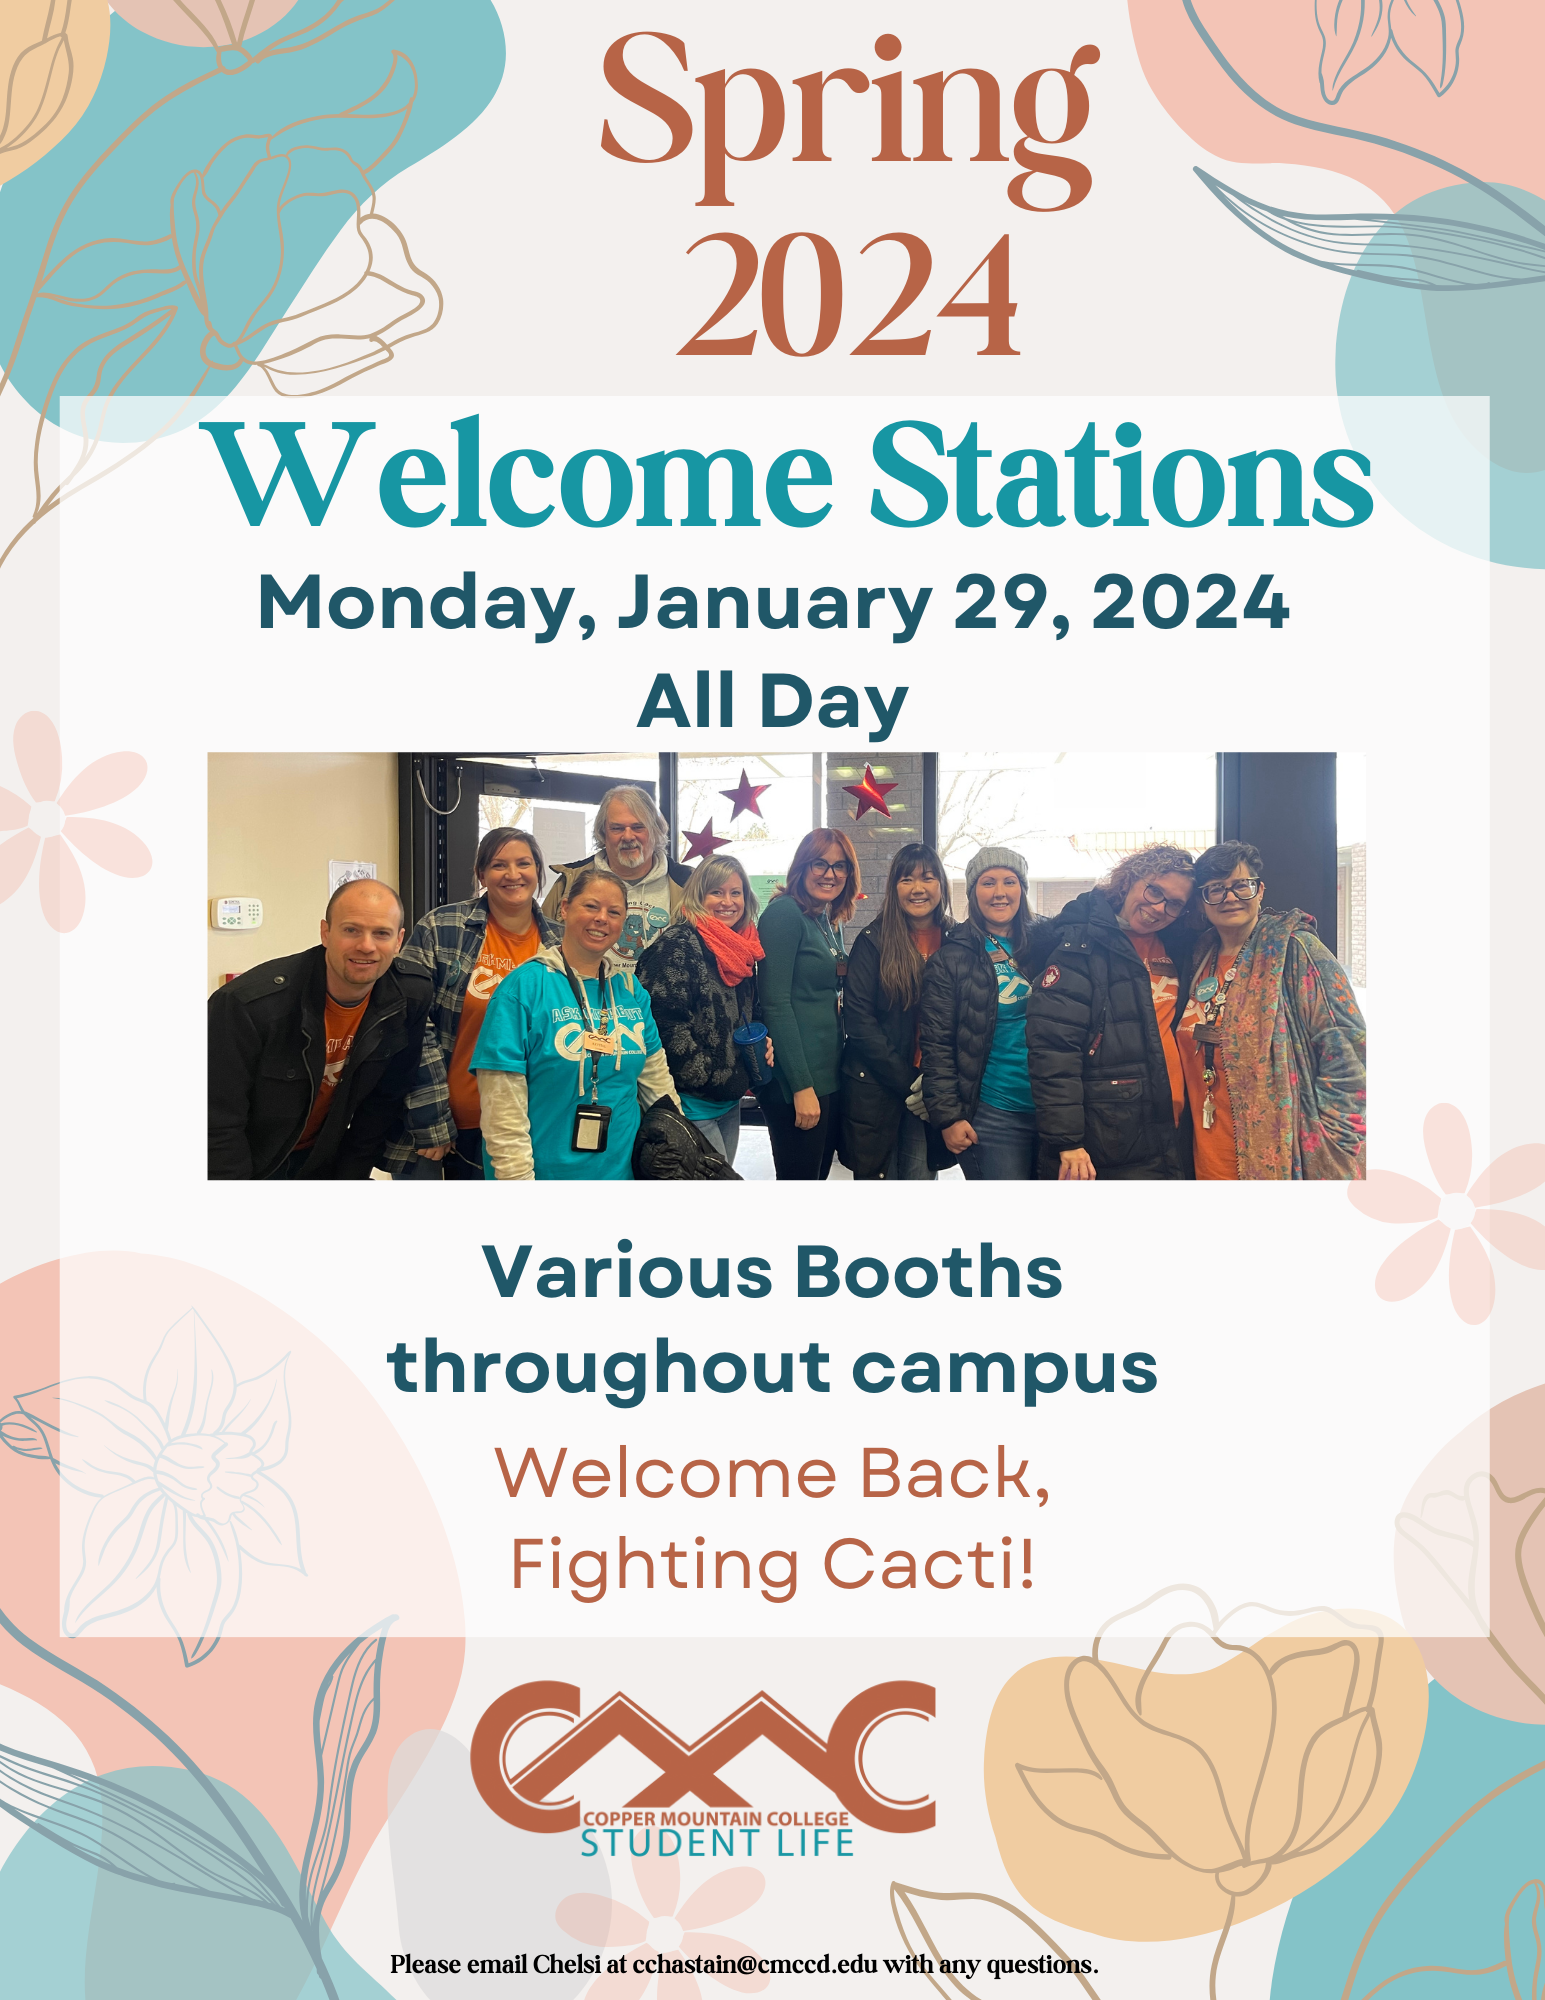 Welcome Stations will have various booths throughout campus on January 29th, 2025